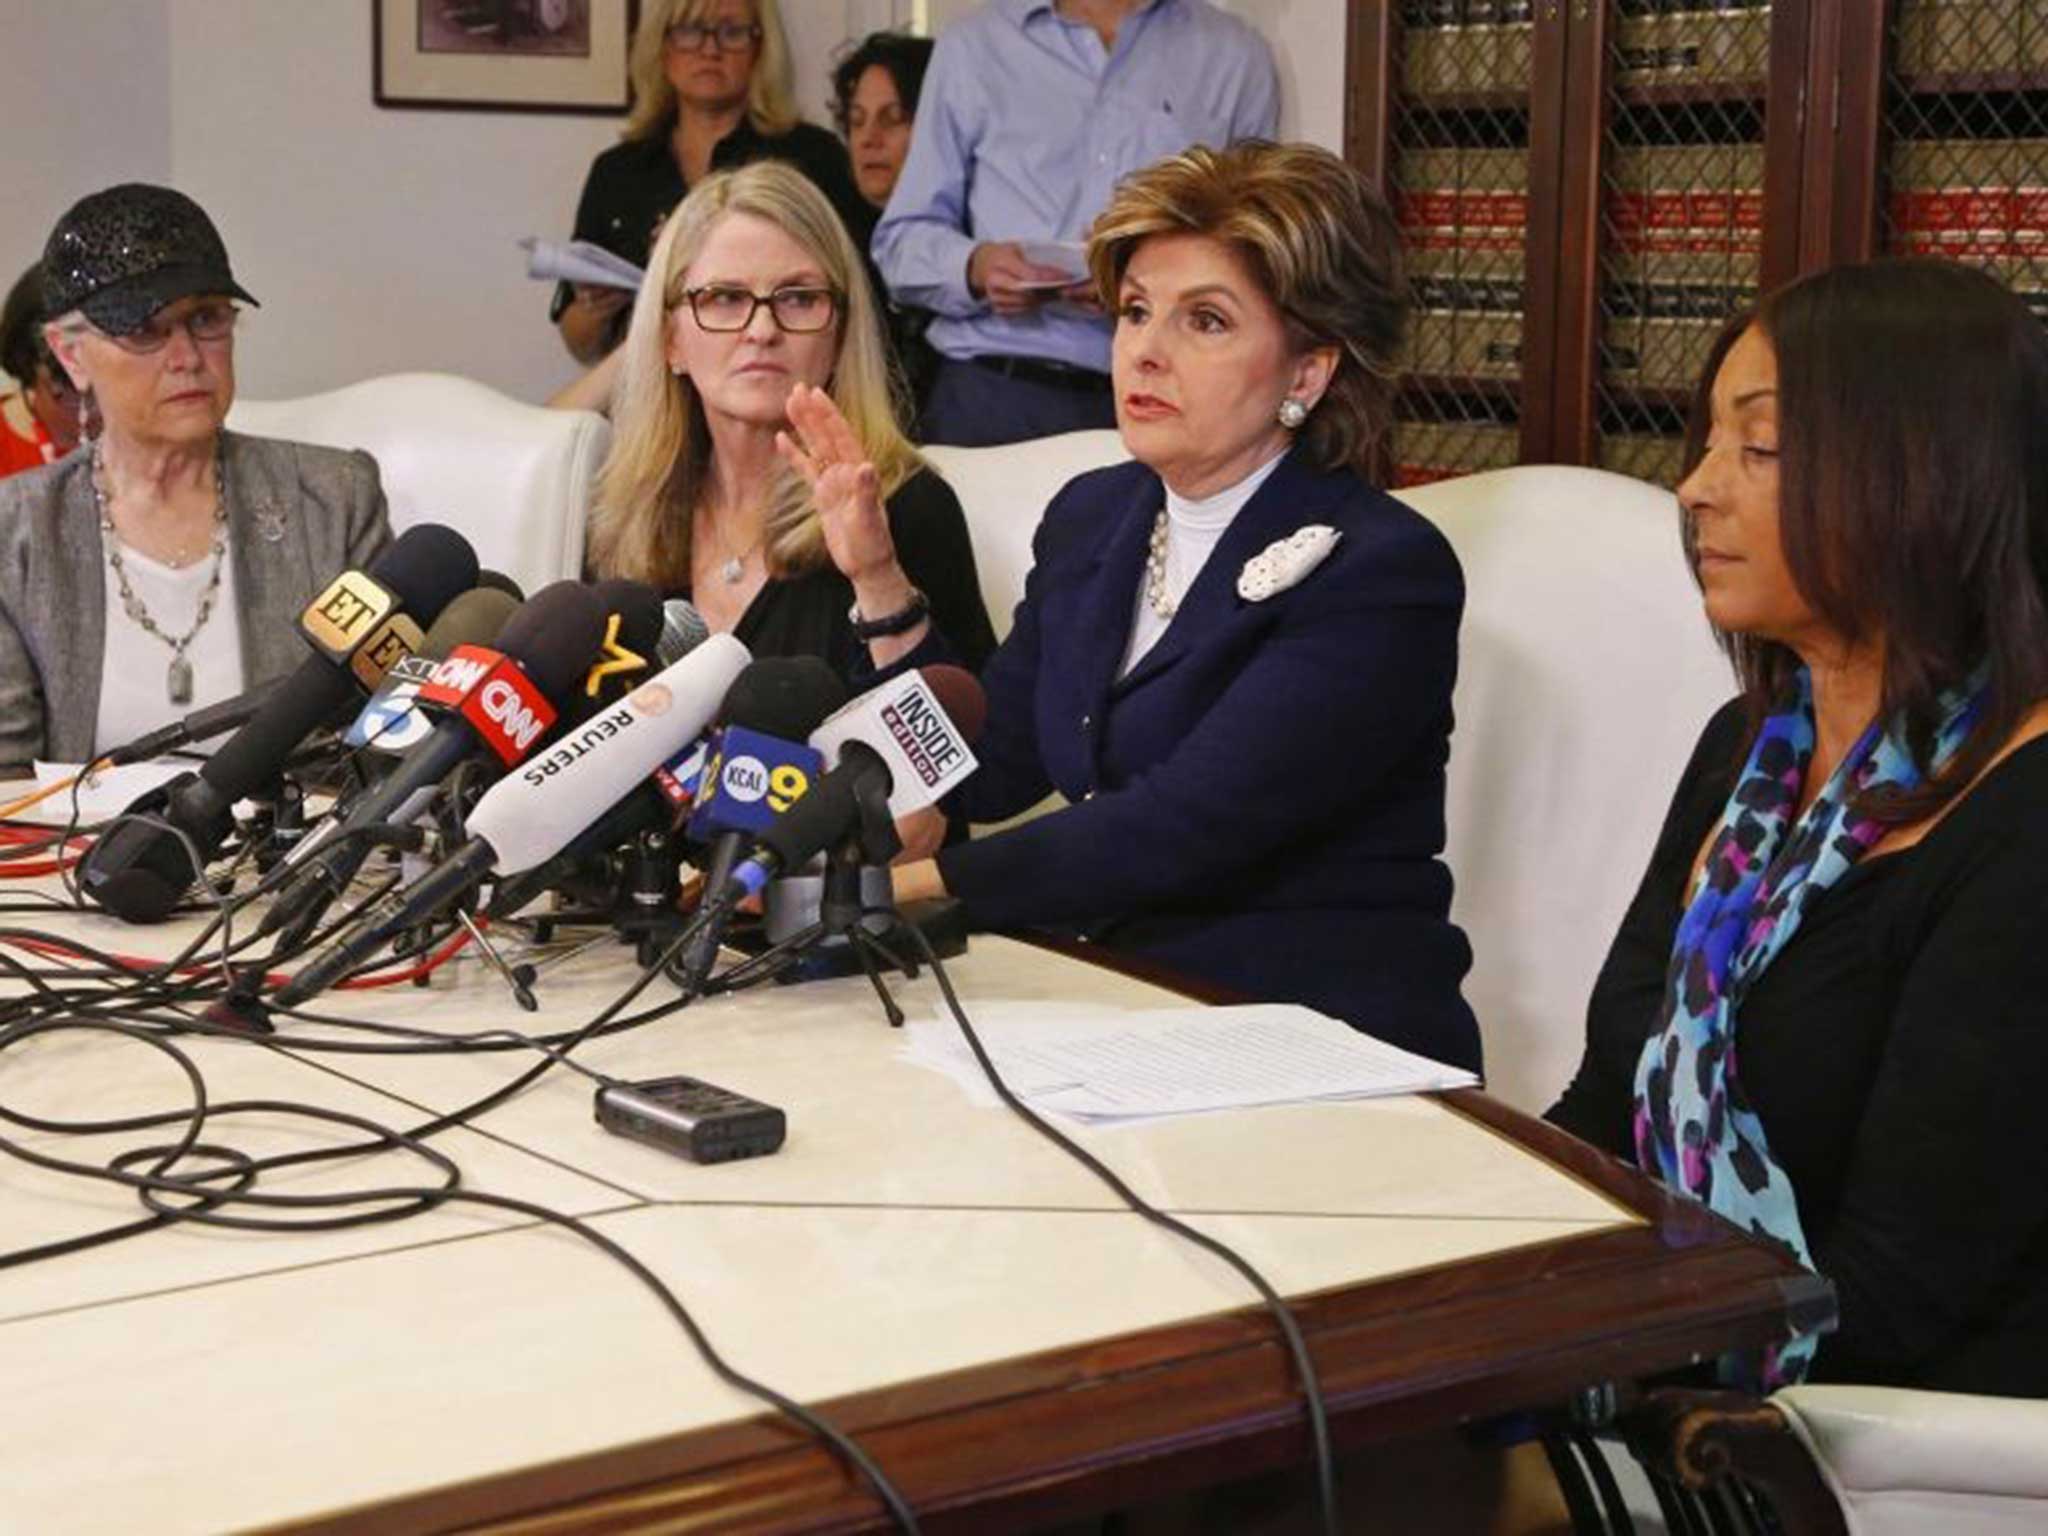 Three women who allege they were sexually assaulted by comedian Bill Cosby, Linda Kirkpatrick (2nd from left) and two unidentified women, sit with lawyer Gloria Allred